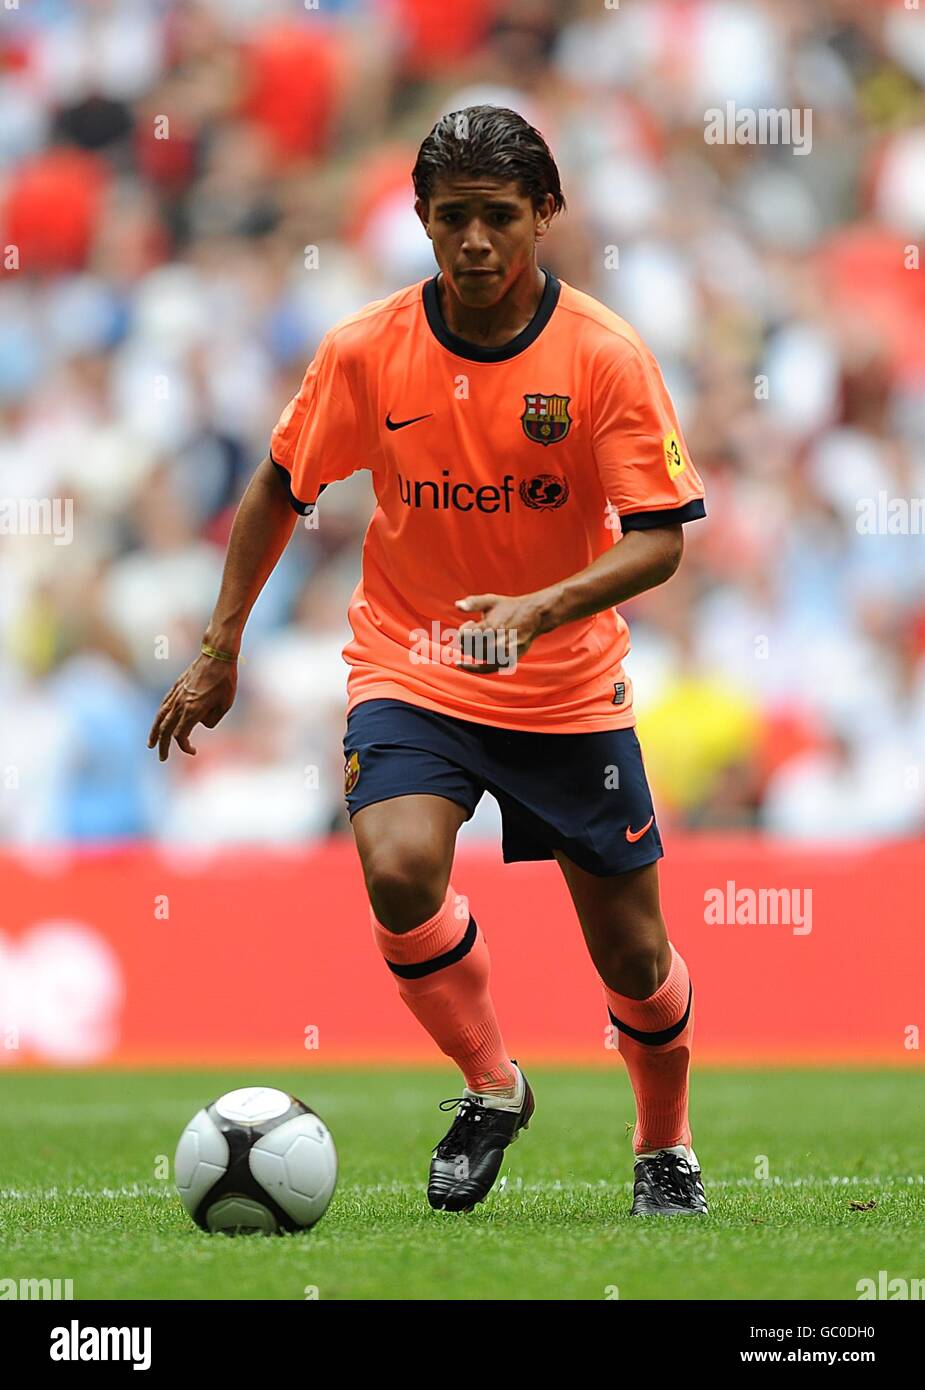 Football - coupe Wembley 2009 - Barcelone / Al Ahly - Stade Wembley. Jonathan dos Santos, Barcelone Banque D'Images